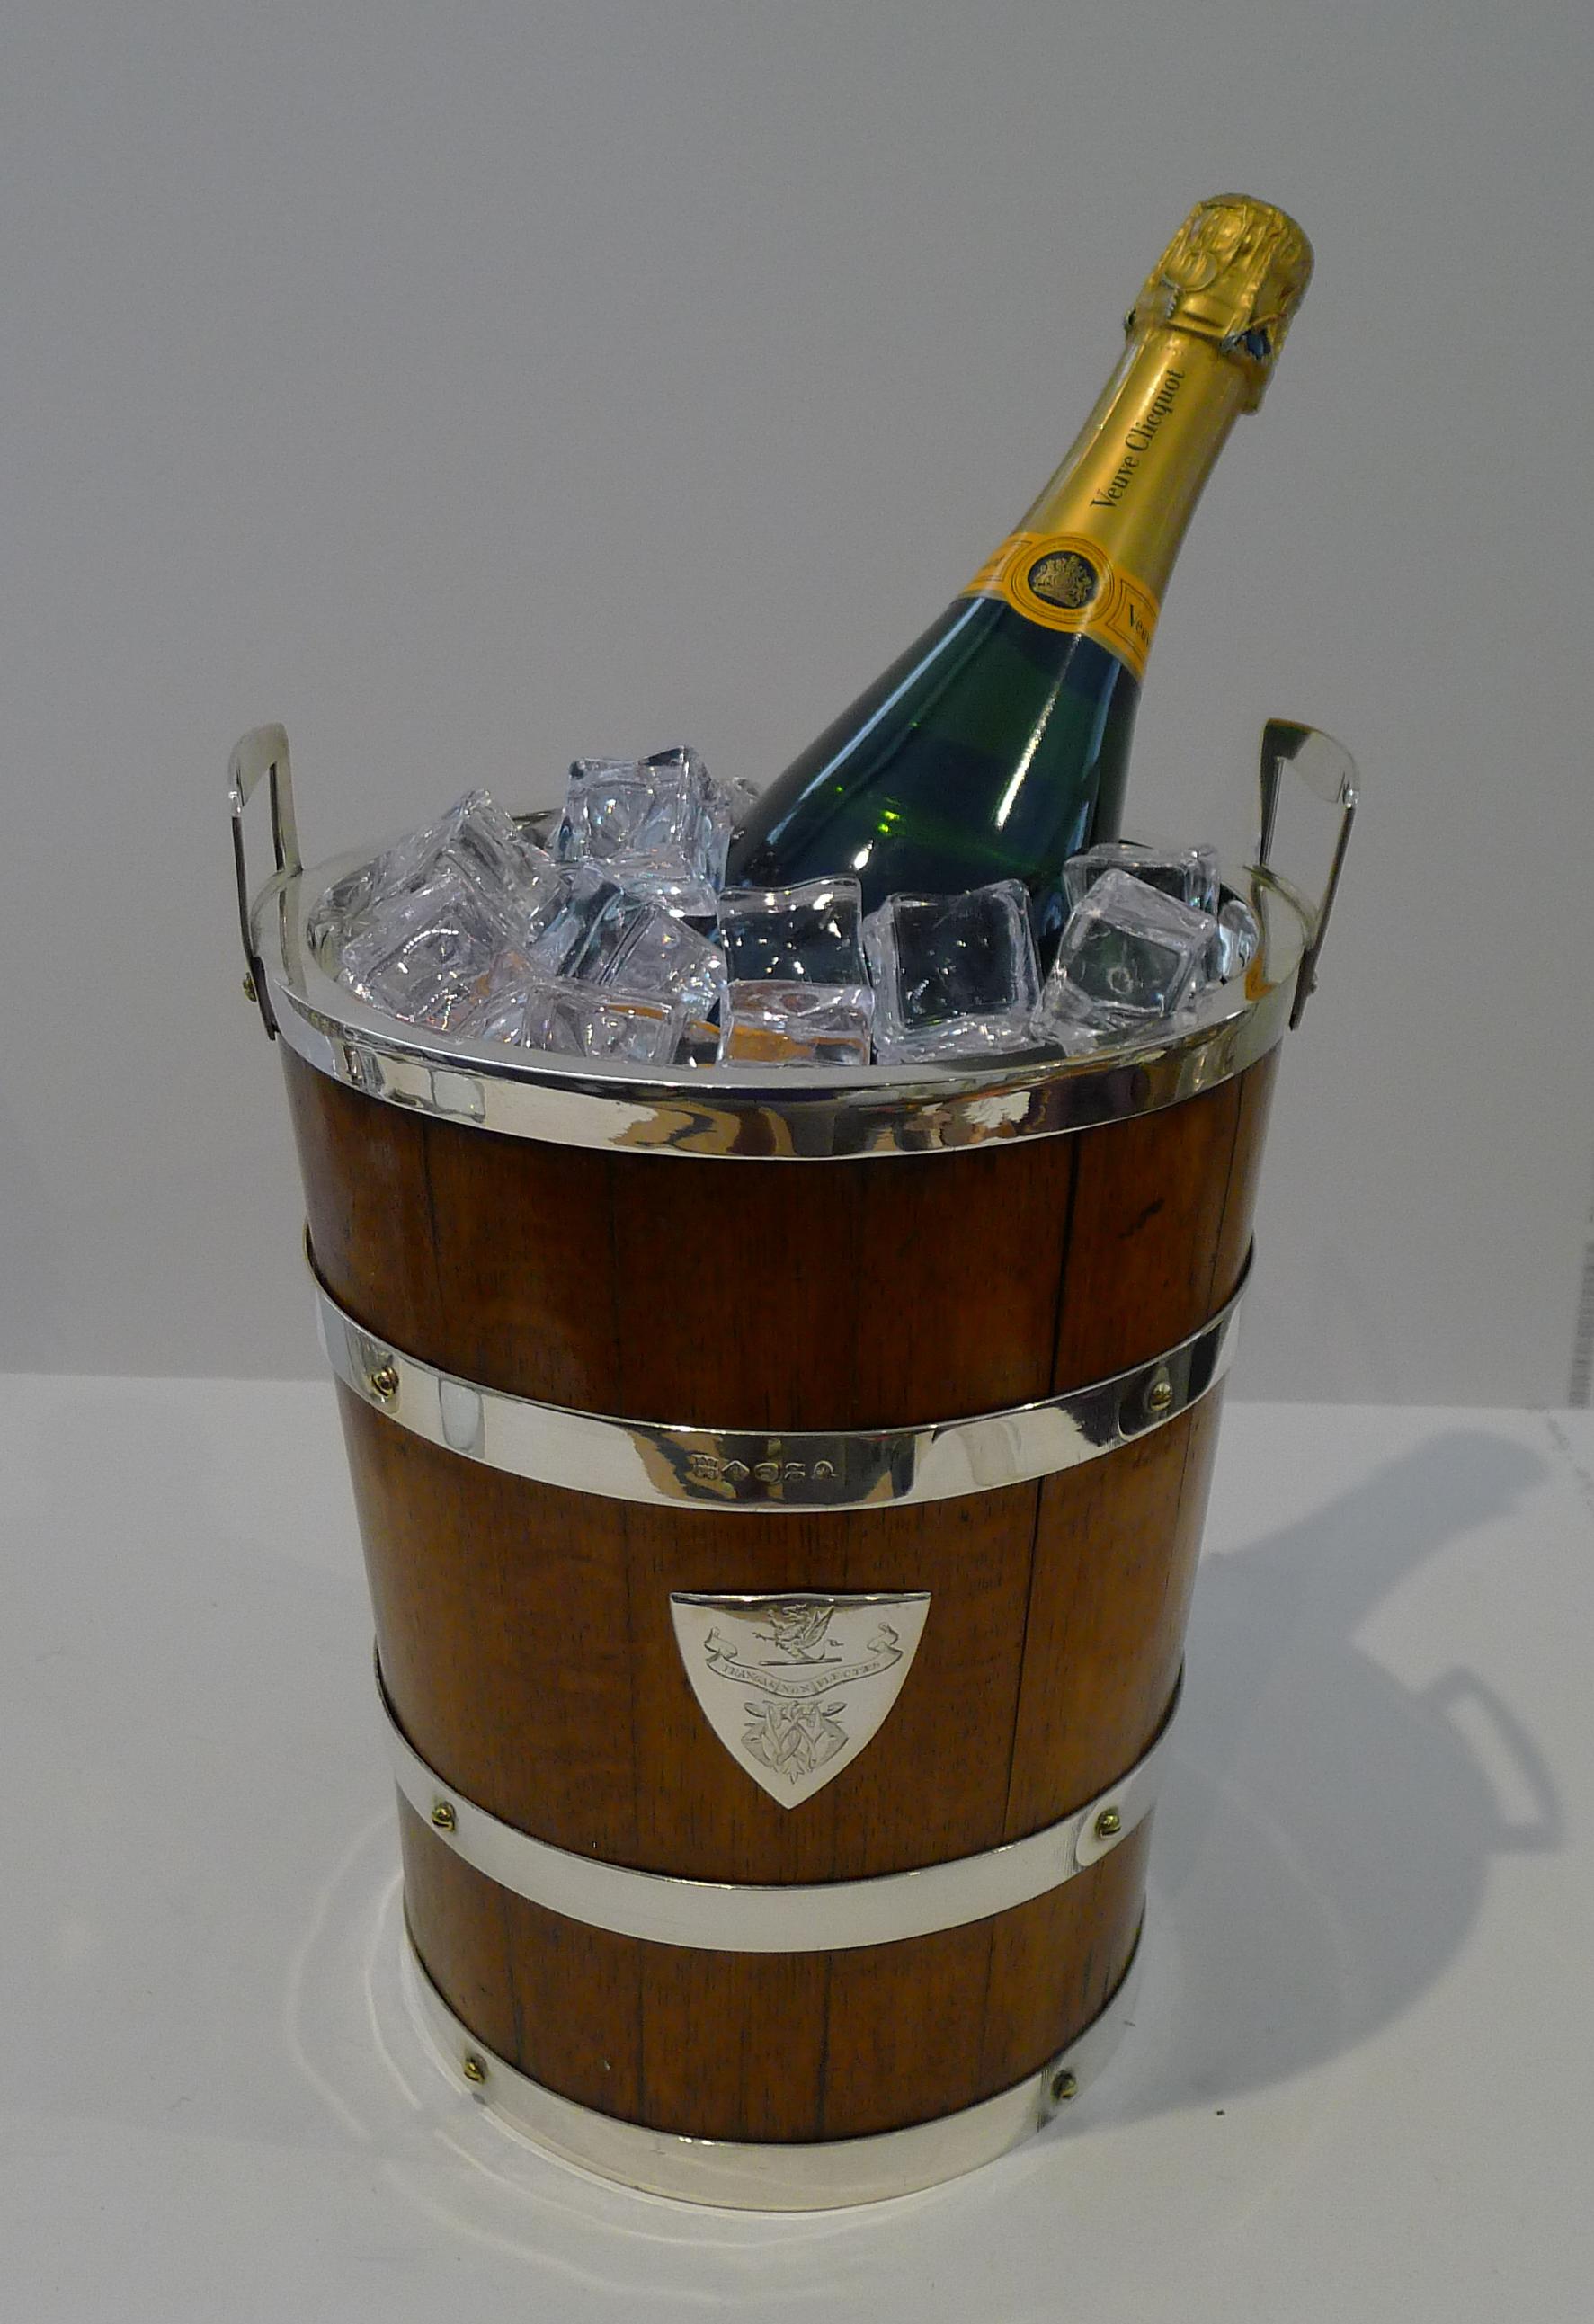 Truly a rare find, an antique English Oak and silver plated wine cooler / Champagne bucket in the form of a coopered bucket, Victorian in era, dating to c.1870.

The front and back have a shield shaped mount engraved with a very regal armorial crest